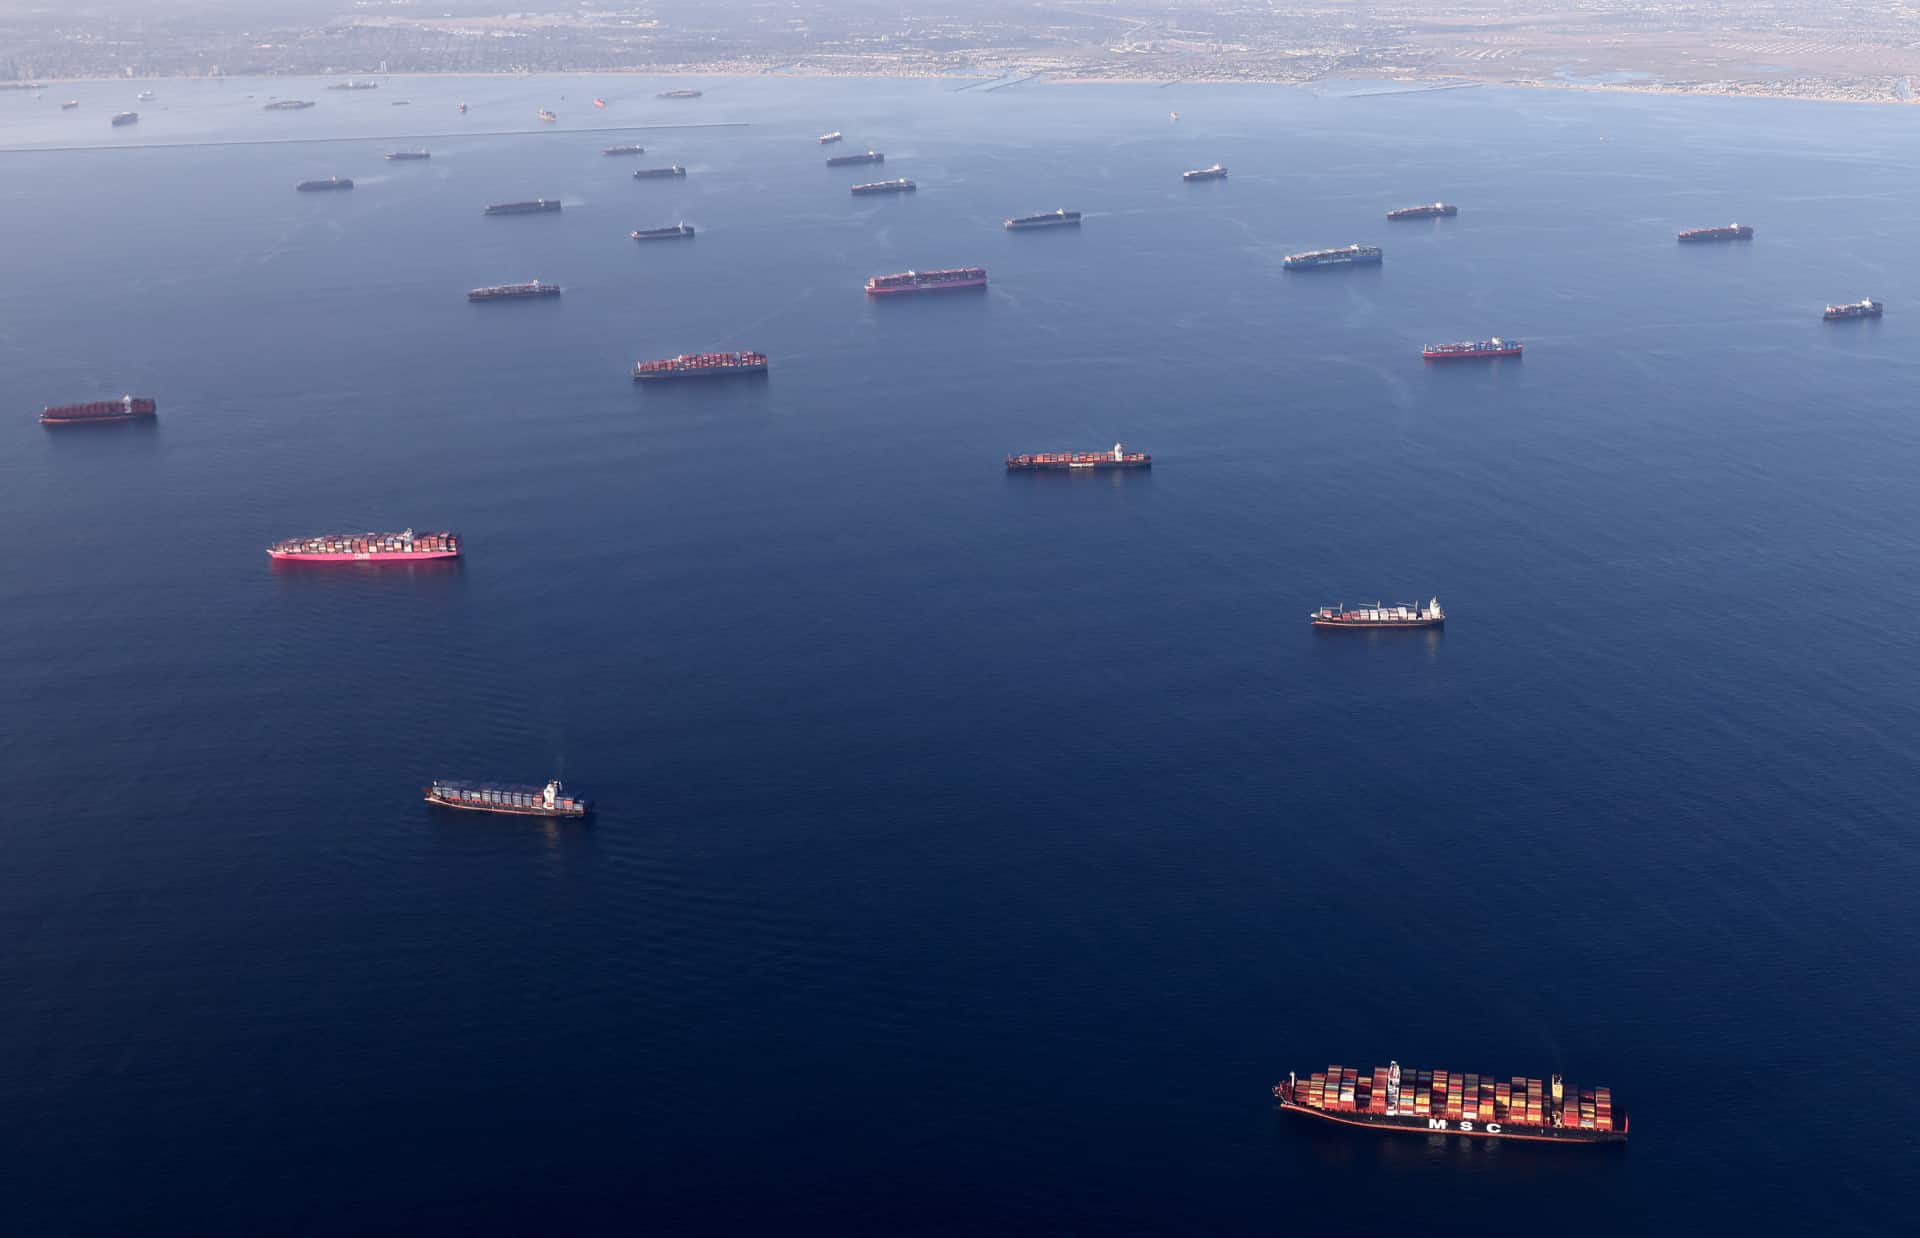 Upwards of 60 Cargo Ships Waited to Port in California this
Week Posing Looming Ramifications for Supply-Chains 1